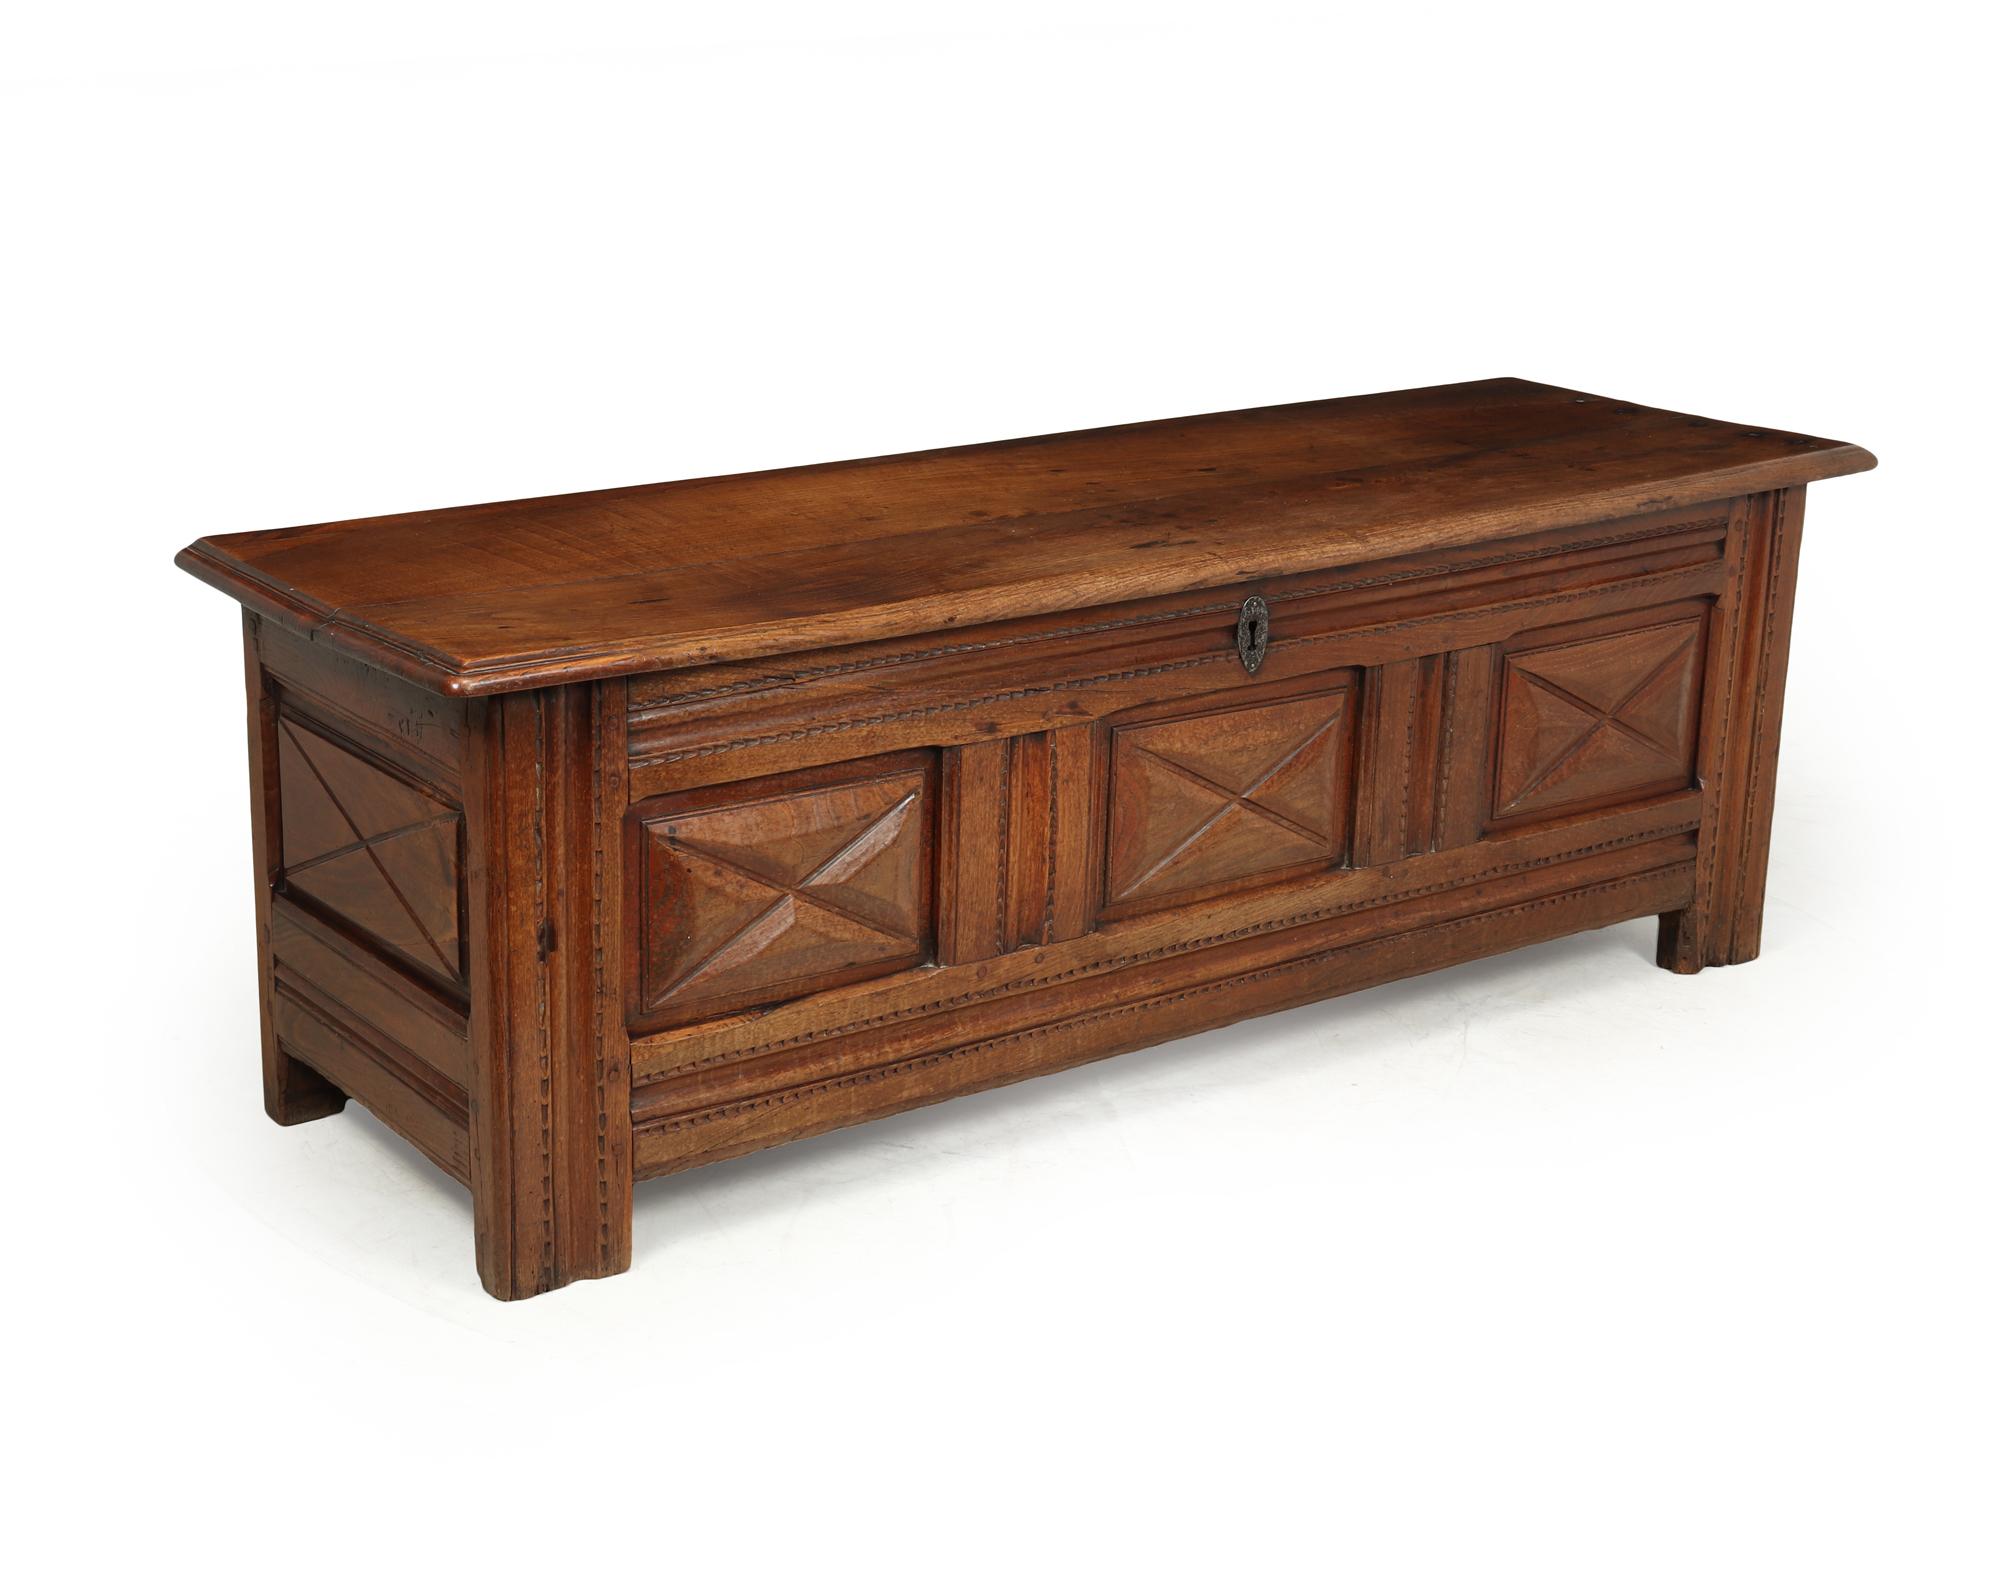 A French 19th century sold oak coffer or blanket box ideal for the foot of a five foot bed, with paneled front and sides, lock missing and non original hinges in good condition having age related wear and waxed finish, with great colour and